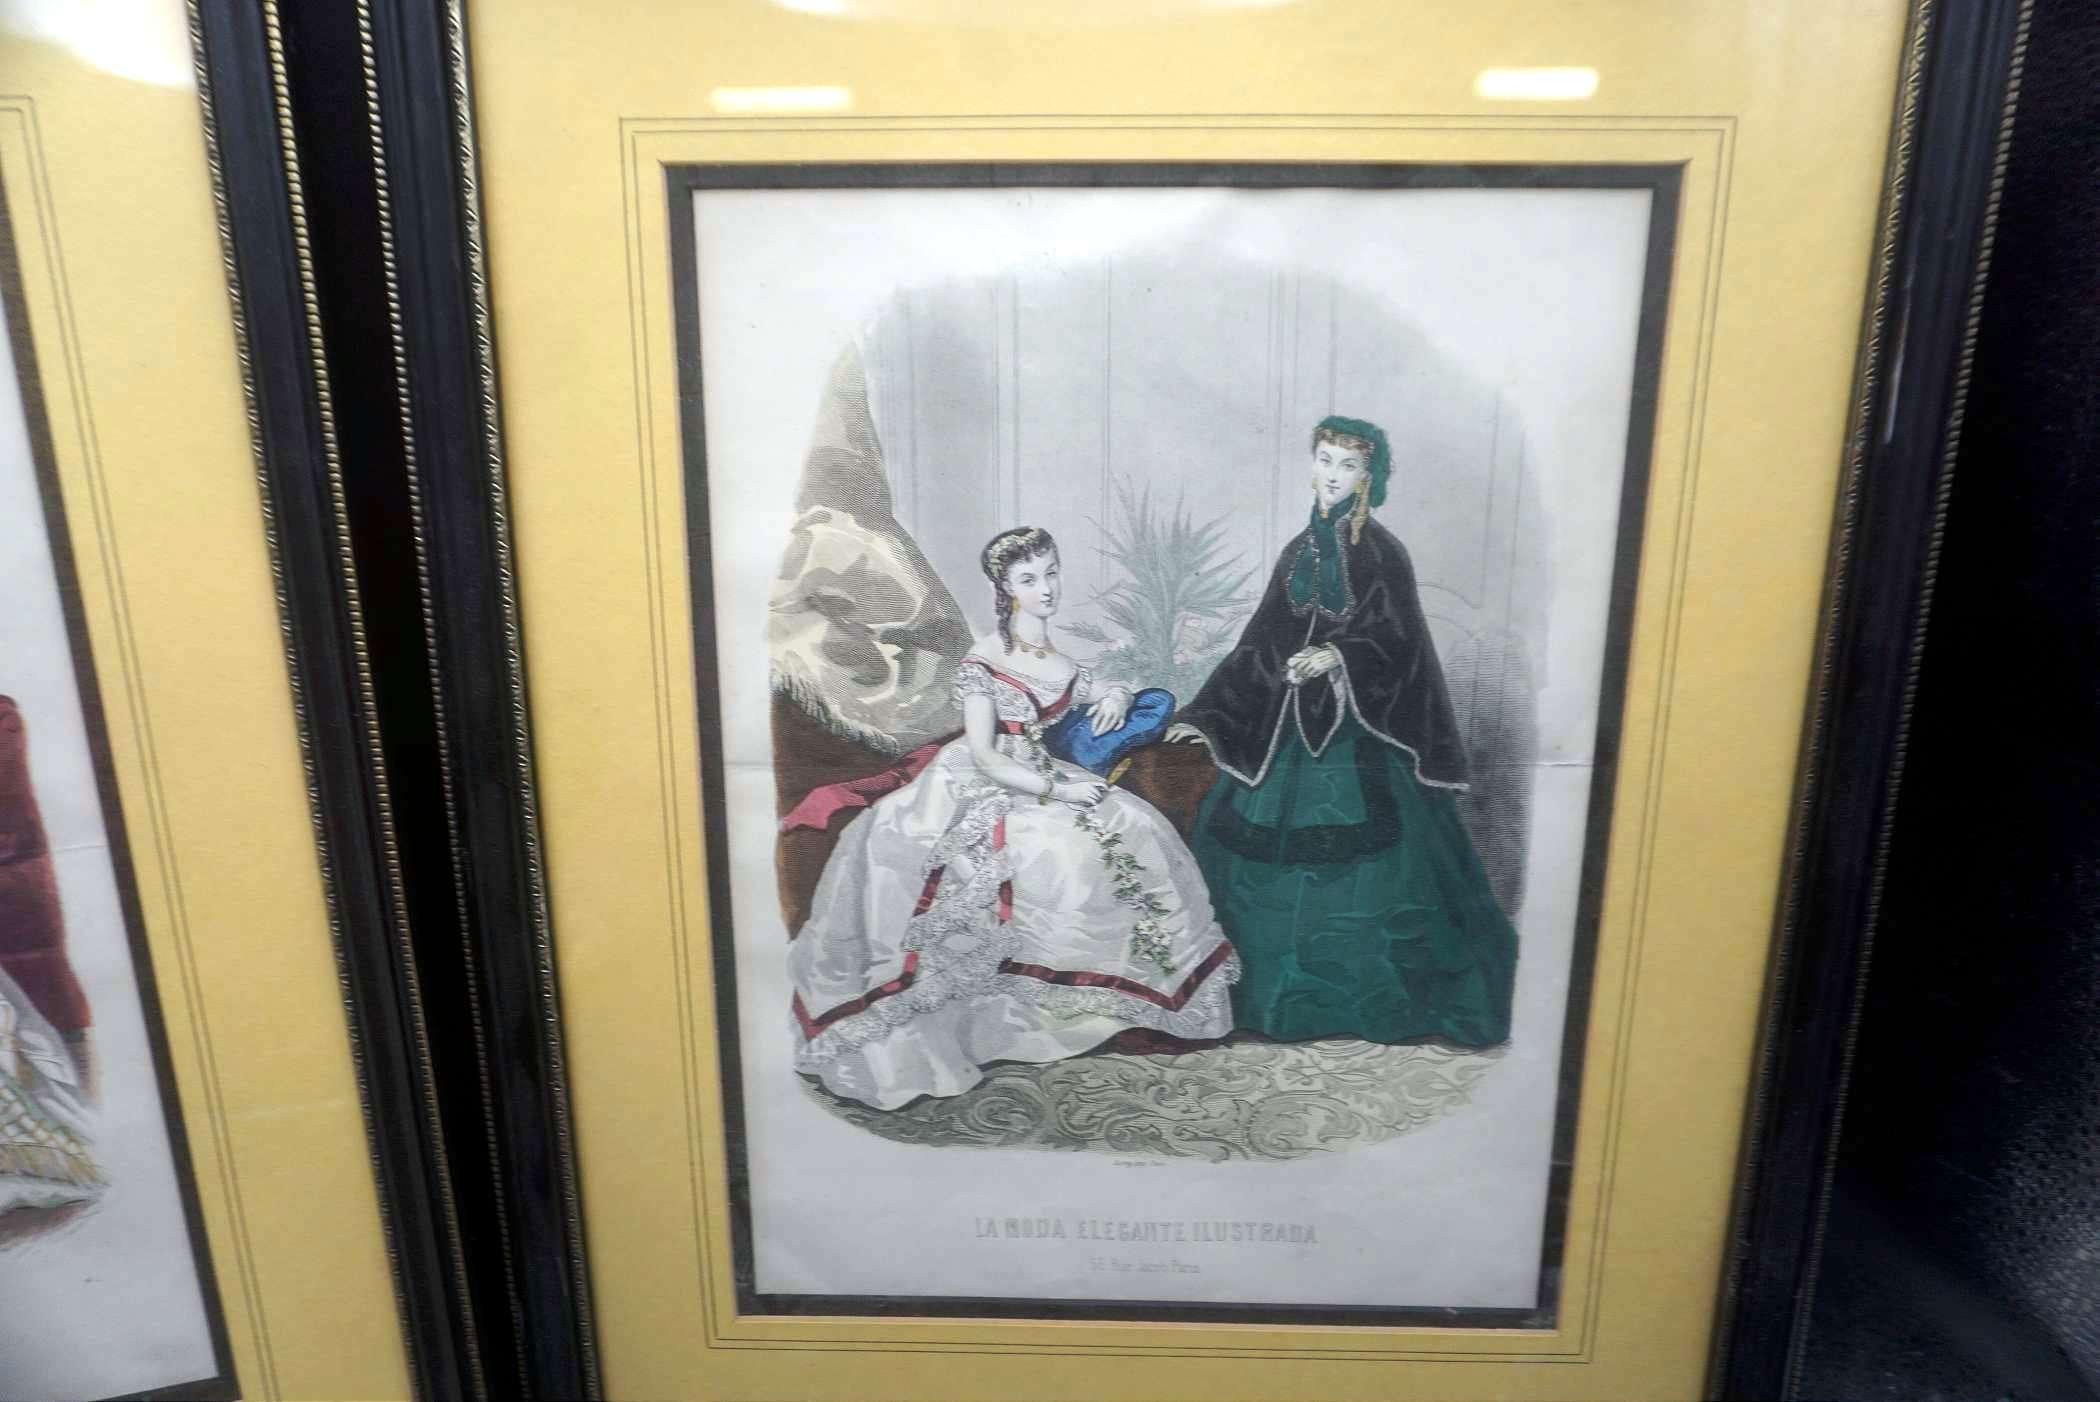 2 - Framed Lady Pictures (Paris Fashions)